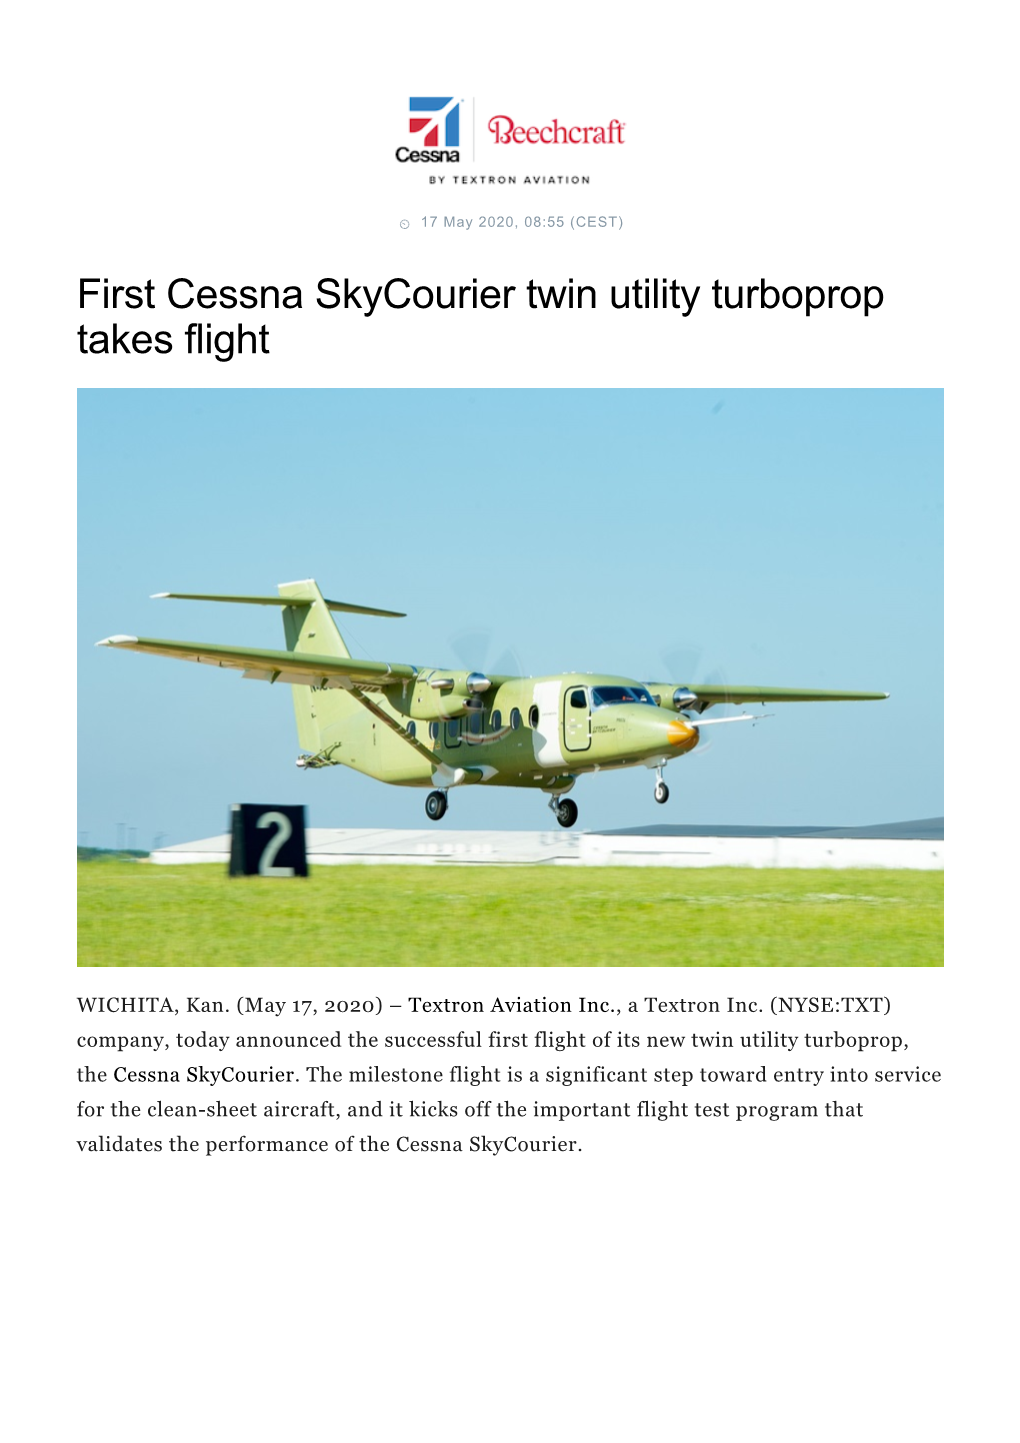 First Cessna Skycourier Twin Utility Turboprop Takes Flight